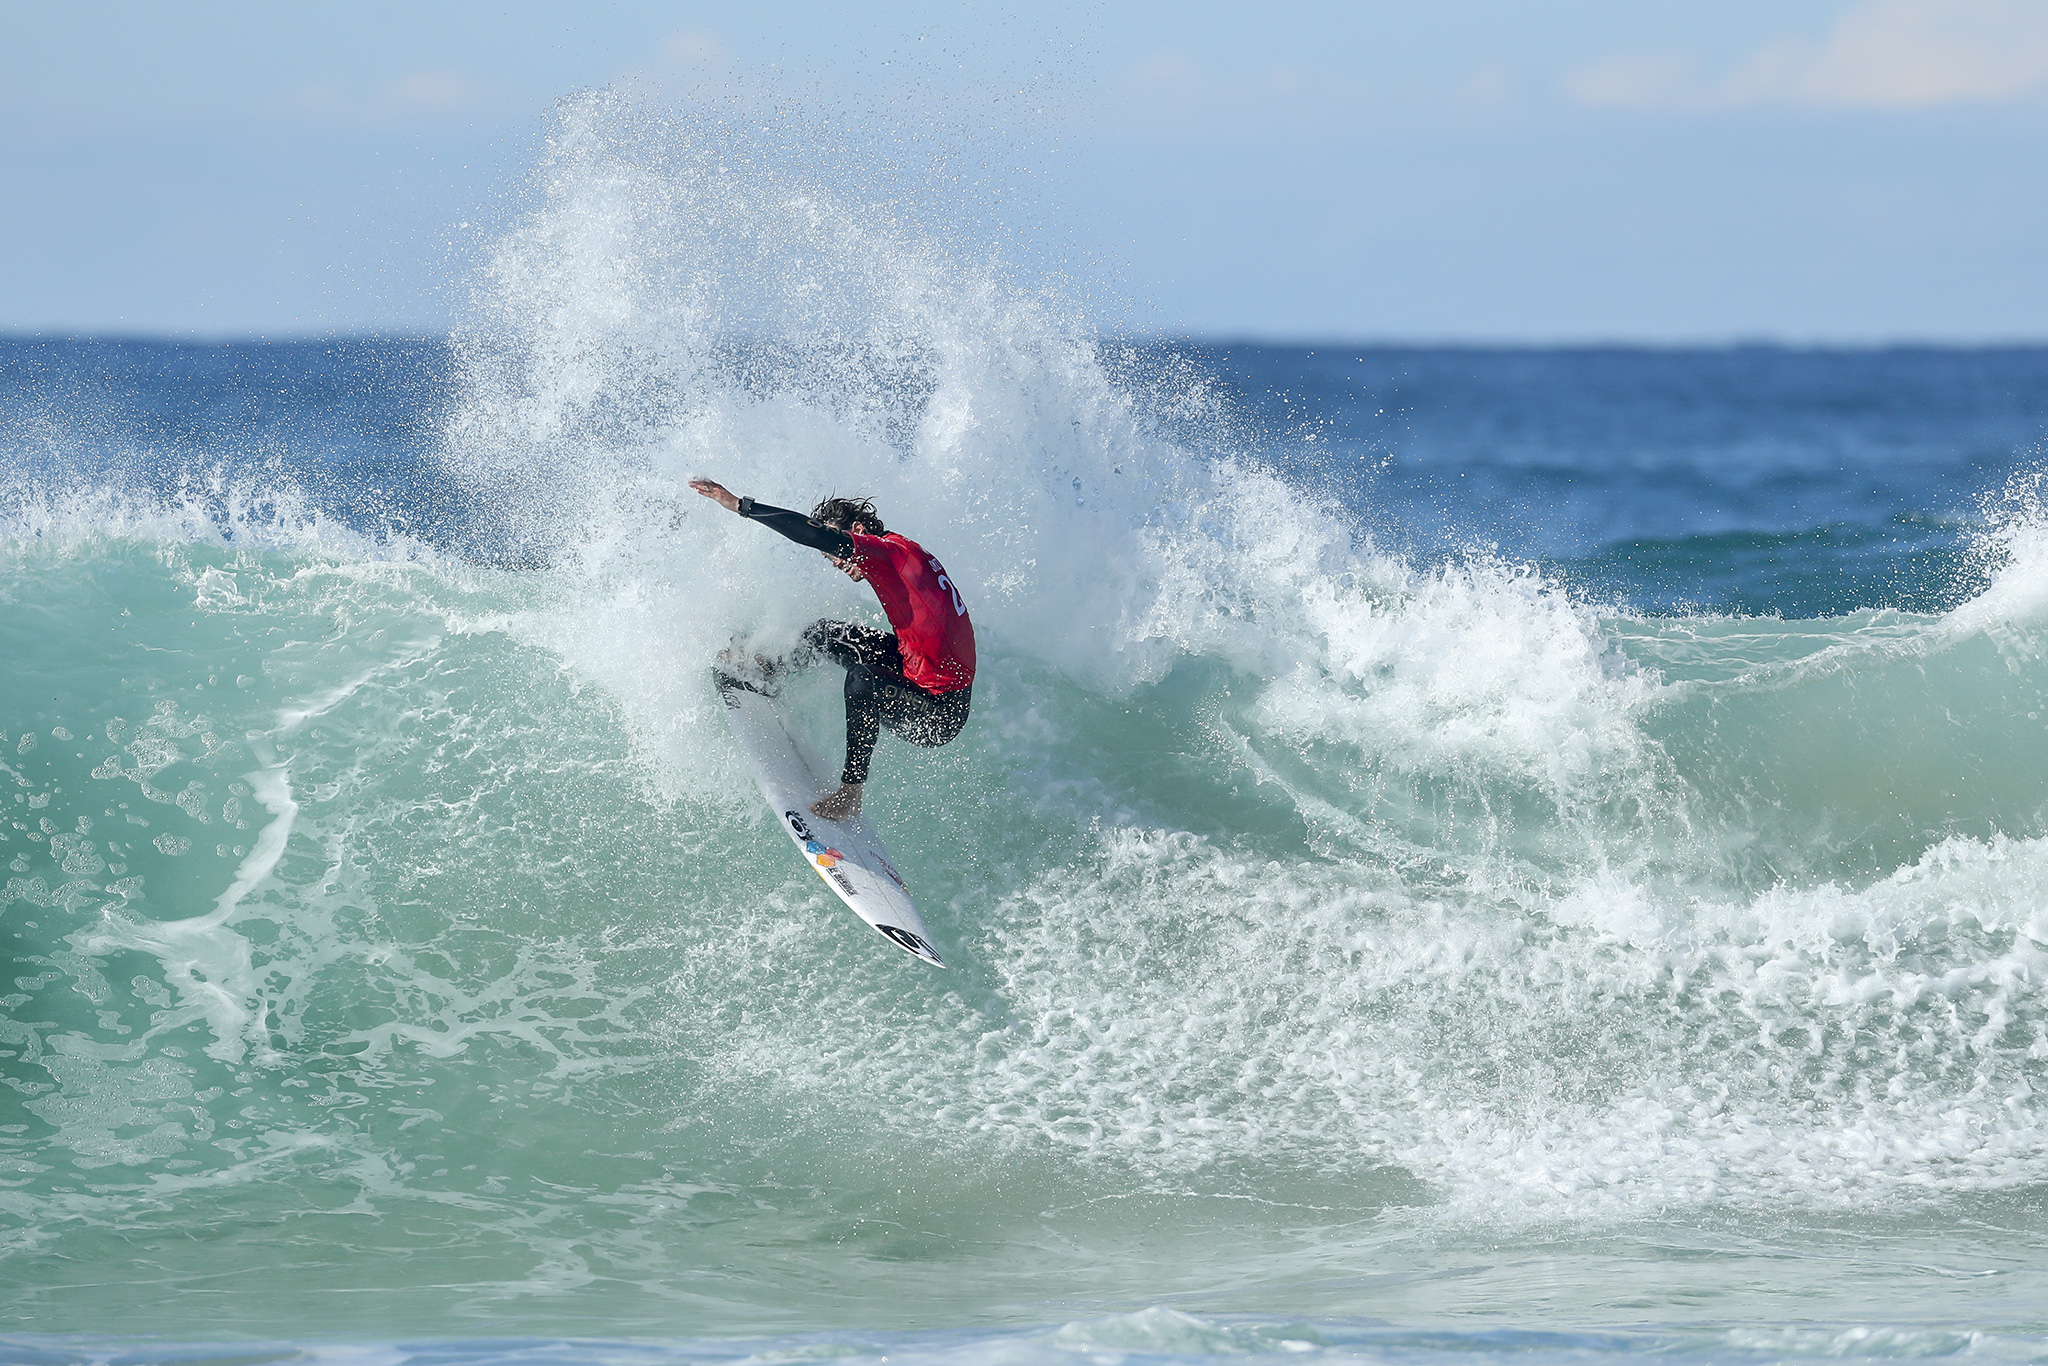 Jordy Smith of South Africa (pictured) winning his round three heat at the JBay Open on Thursday July 7, 2016. PHOTO: © WSL/ Cestari SOCIAL @wsl @kc80 This is a hand-out image from the Association of Surfing Professionals LLC ("World Surf League") for editorial use only. No commercial rights are granted to the Images in any way. The Images are provided on an "as is" basis and no warranty is provided for use of a particular purpose. Rights to individuals within the Images are not provided. The copyright is owned by World Surf League. Sale or license of the Images is prohibited. ALL RIGHTS RESERVED.